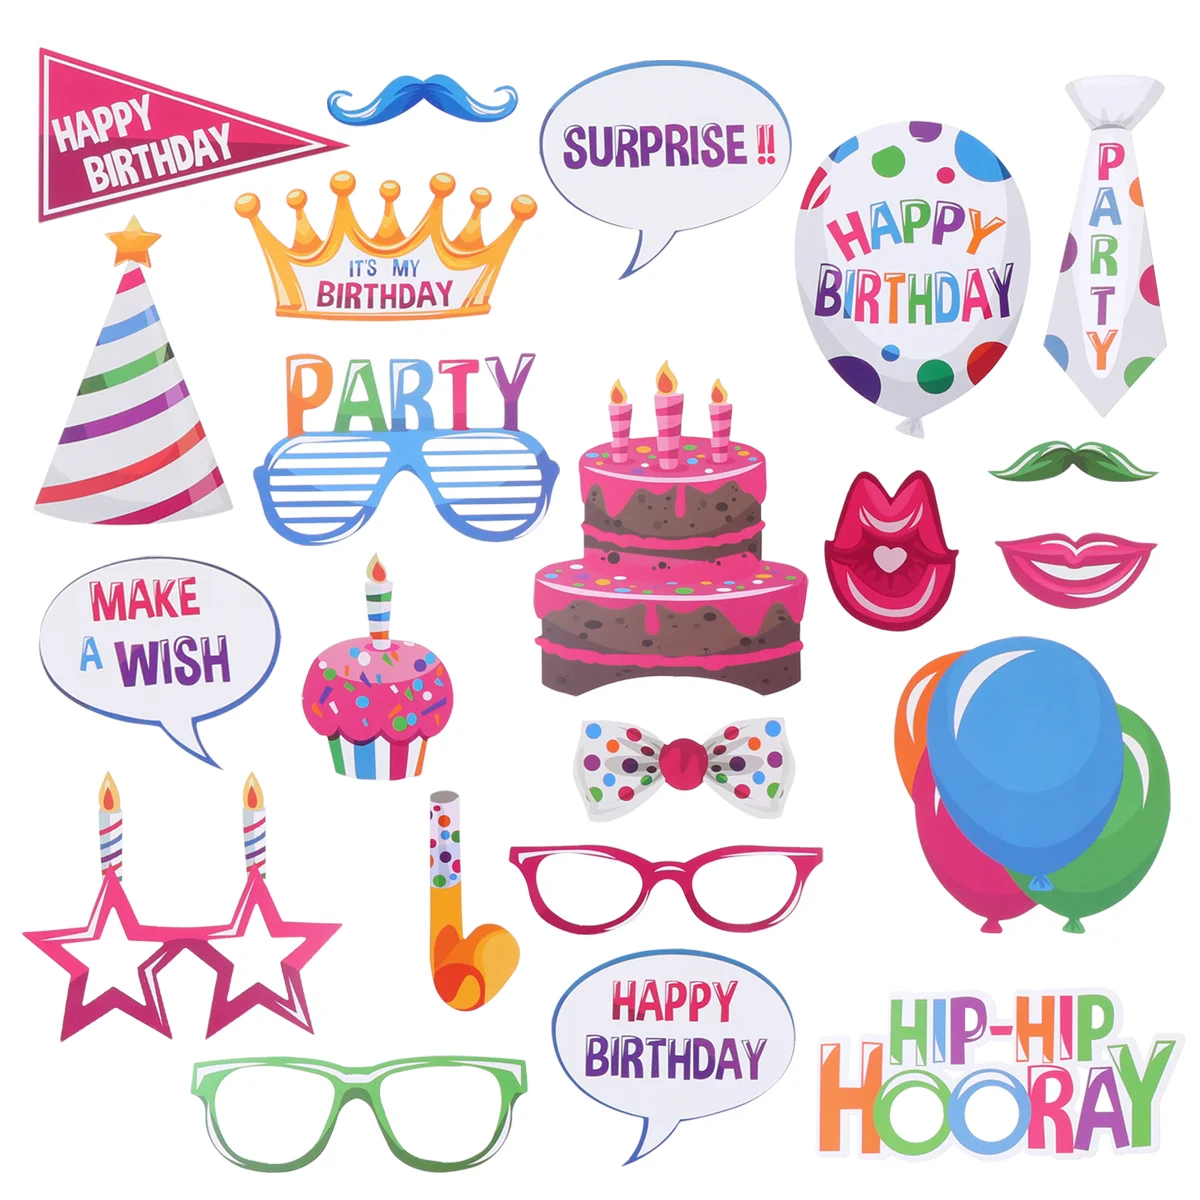 

Props Photo Birthday Booth Funny Diy Signs Stickcenterpieces Table Baby Shower Picture Selfie Sticks Party Favorsphotoshoot